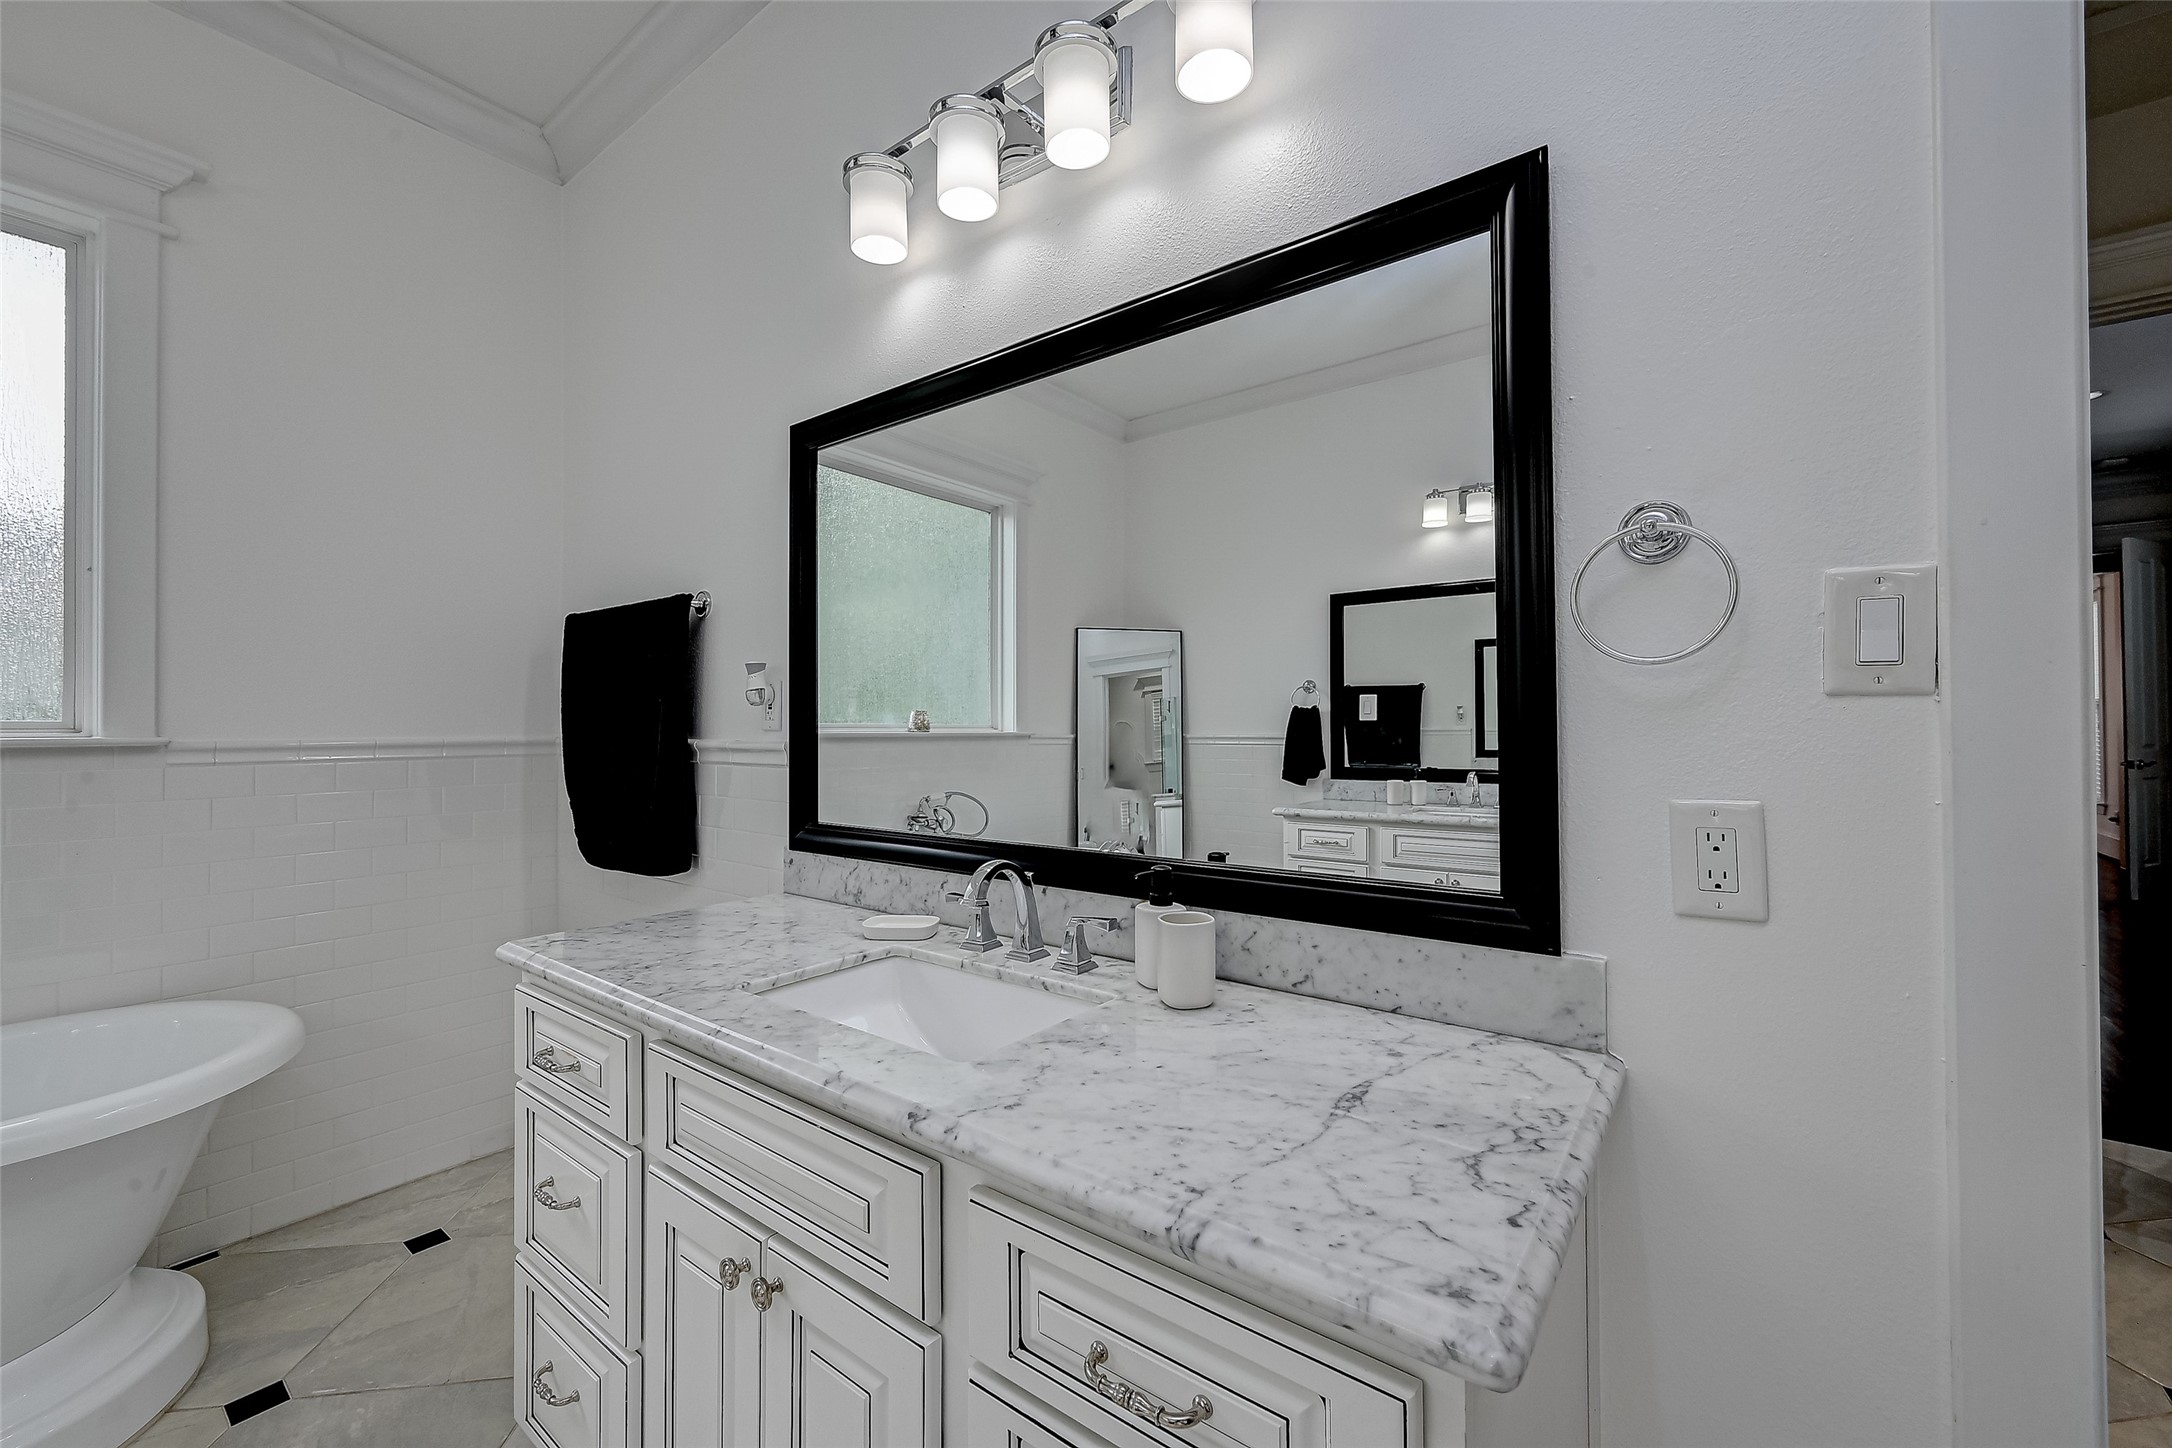 The dual vanities are both functional and stunning.